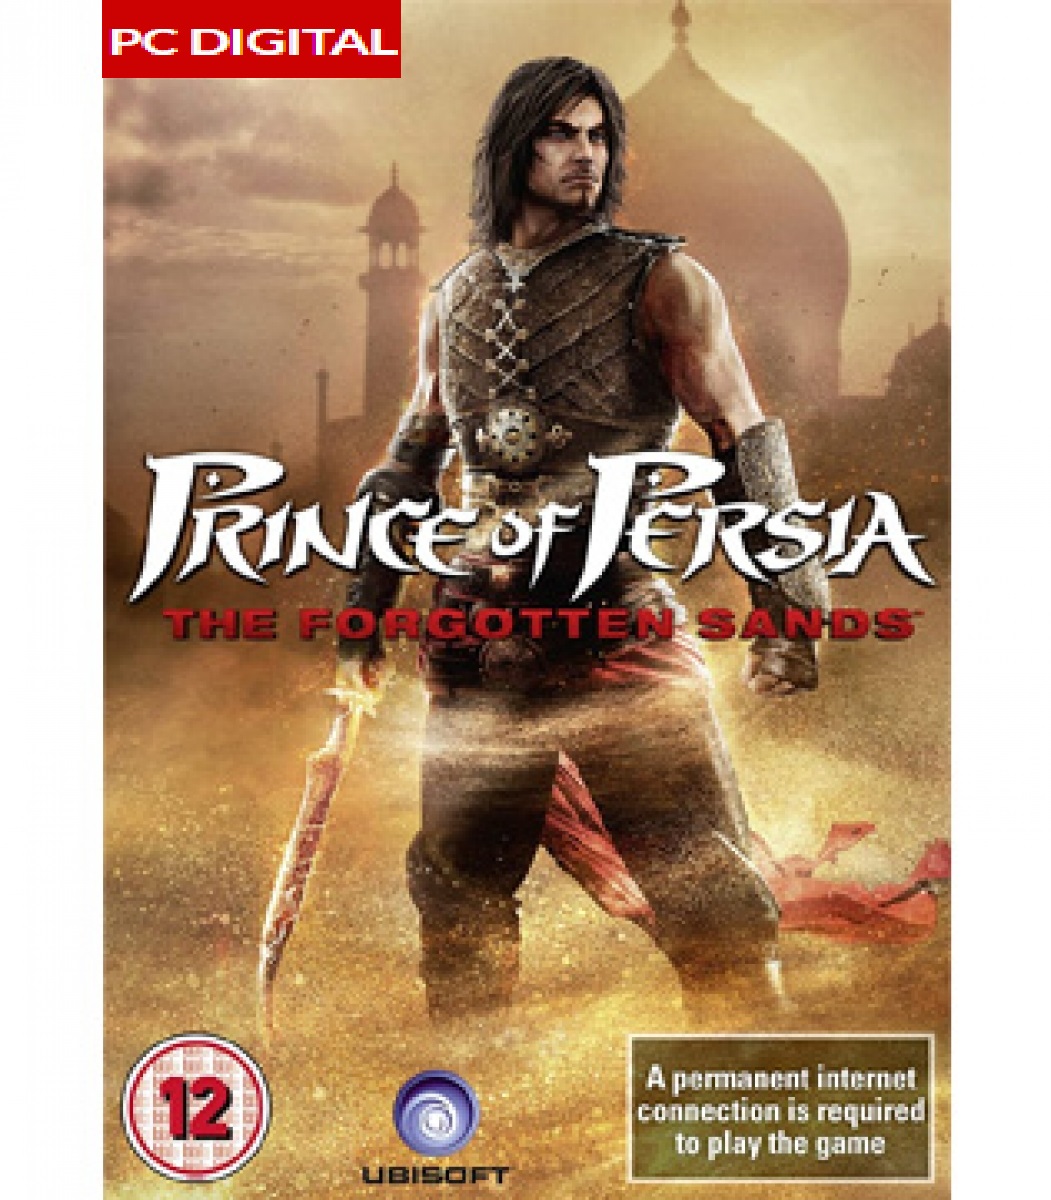 Prince Of Persia®: The Forgotten Sands PC (Digital)